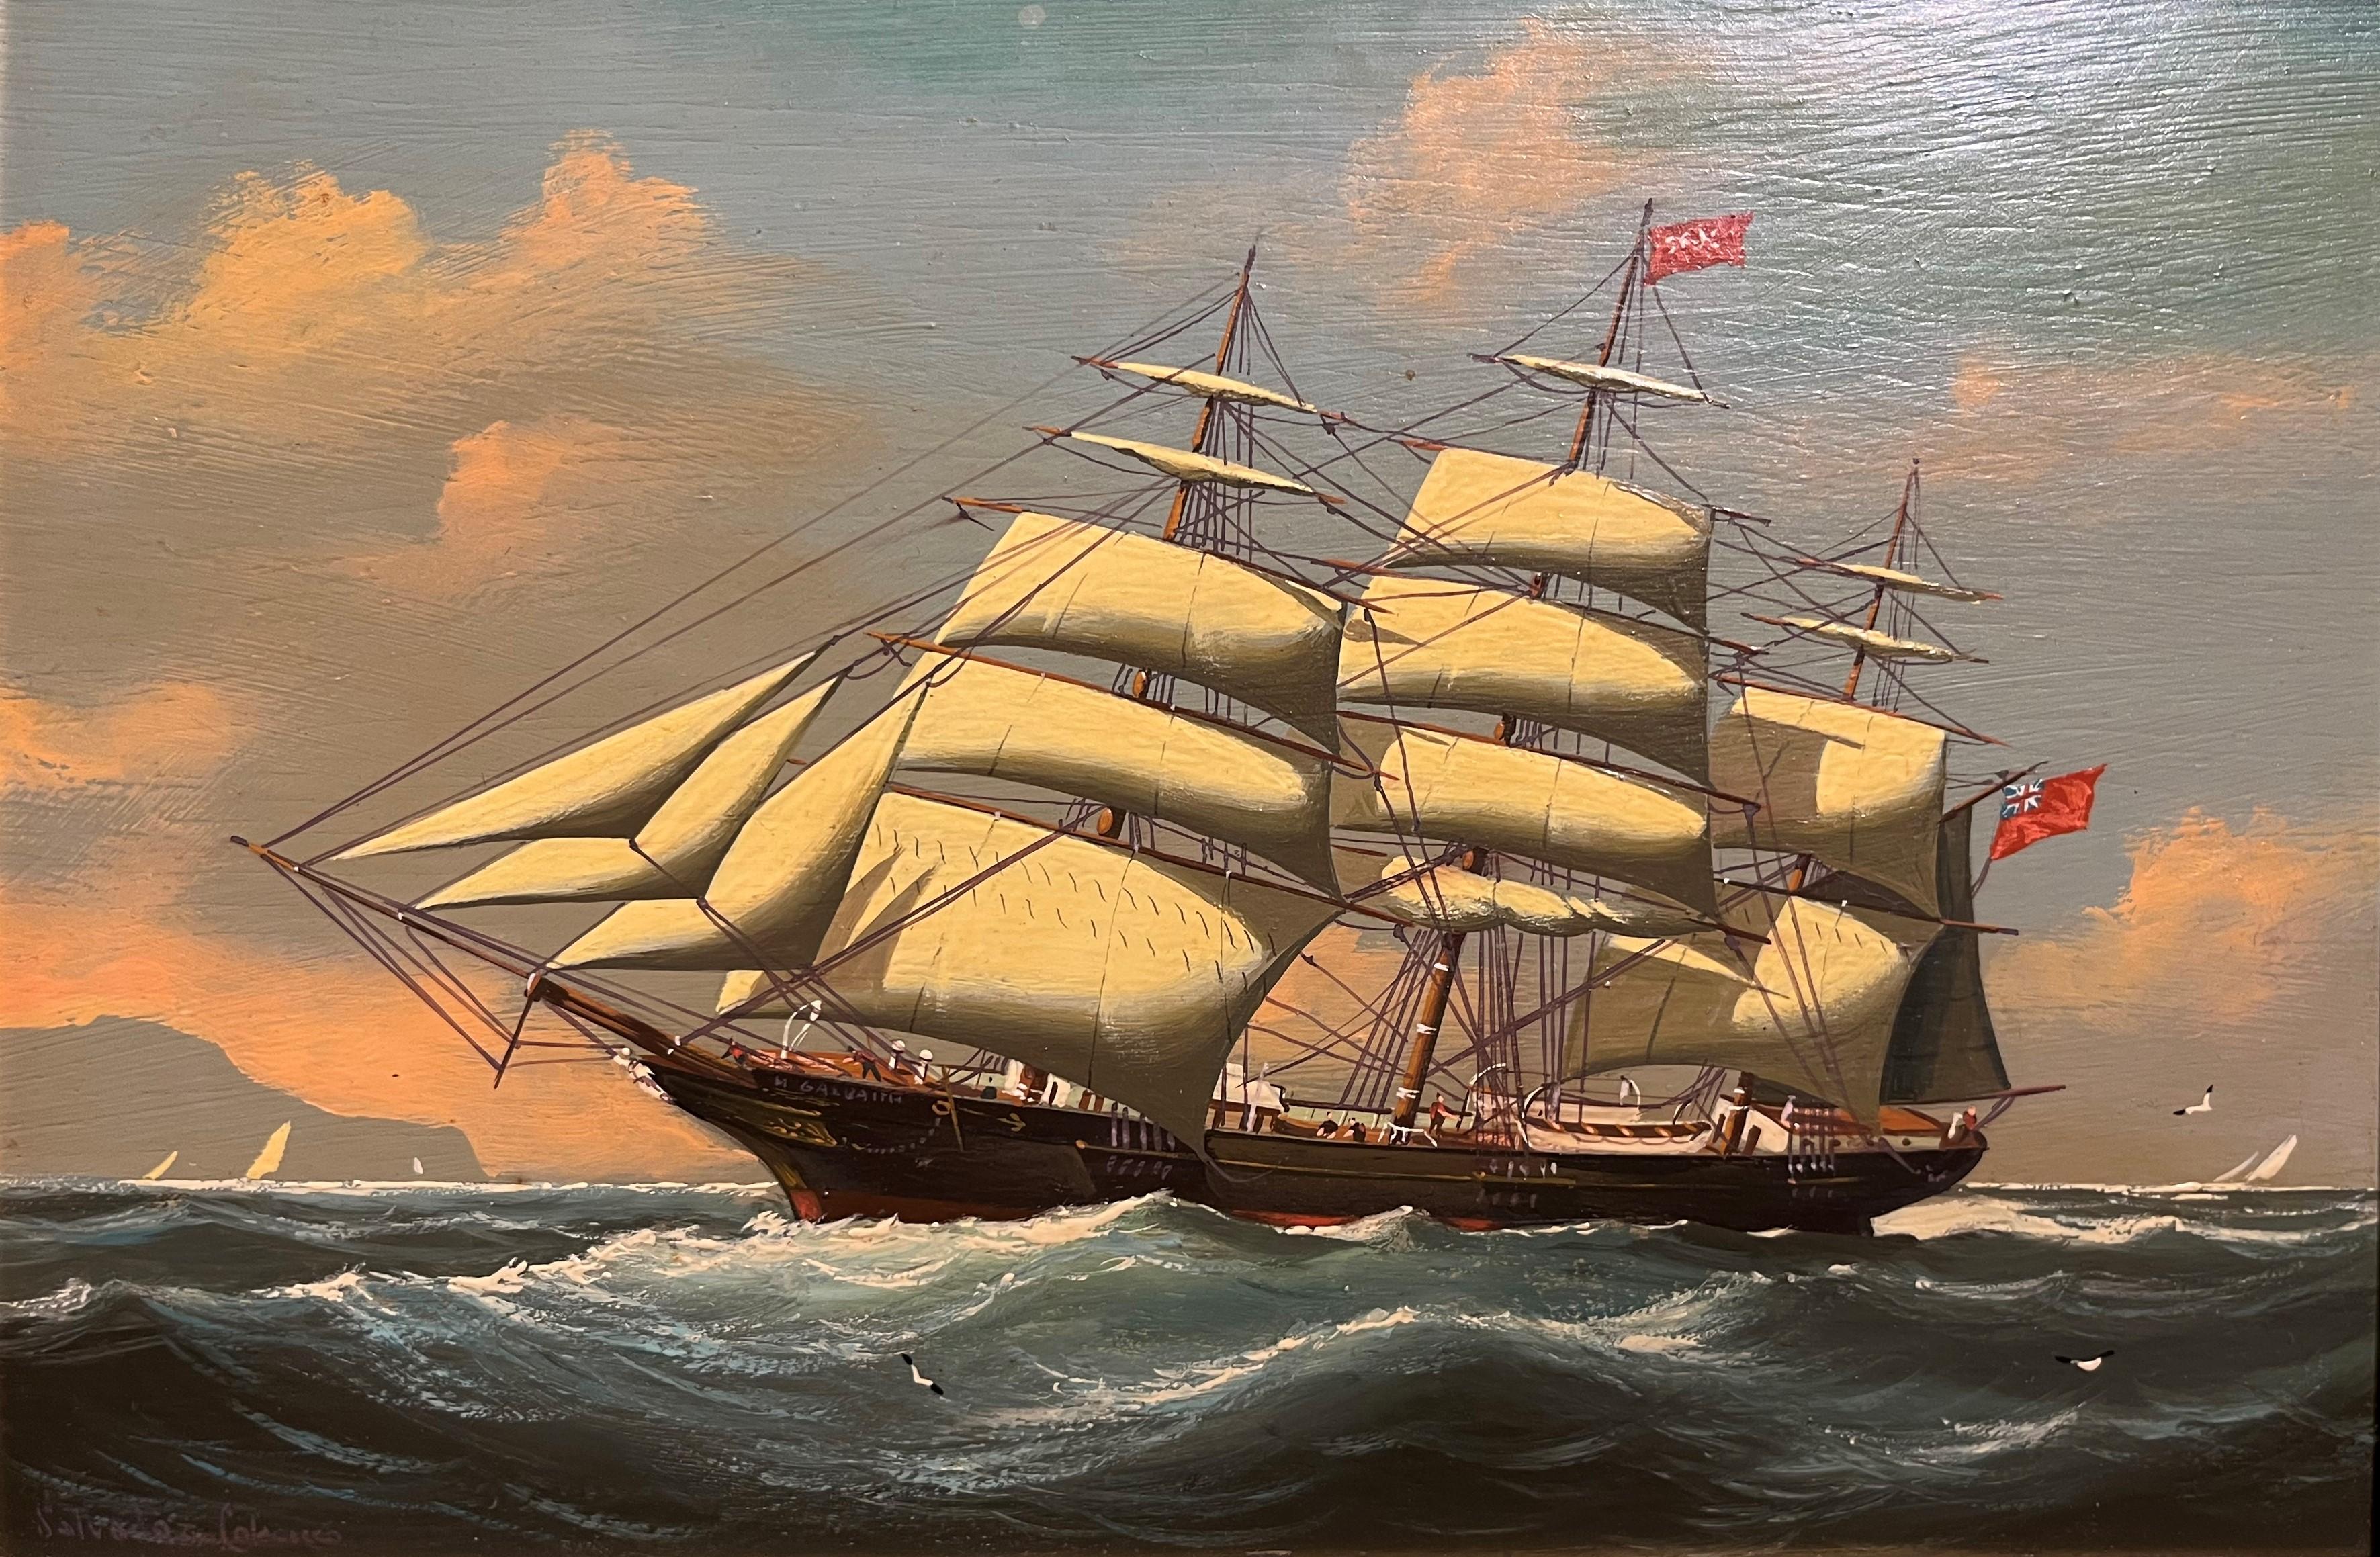 OIL PAINTING Small by SALVATORE COLACICCO (NAVY ADMIRALTY 20th CENTURY PIECE  - Realist Art by Salvatore Colacicco